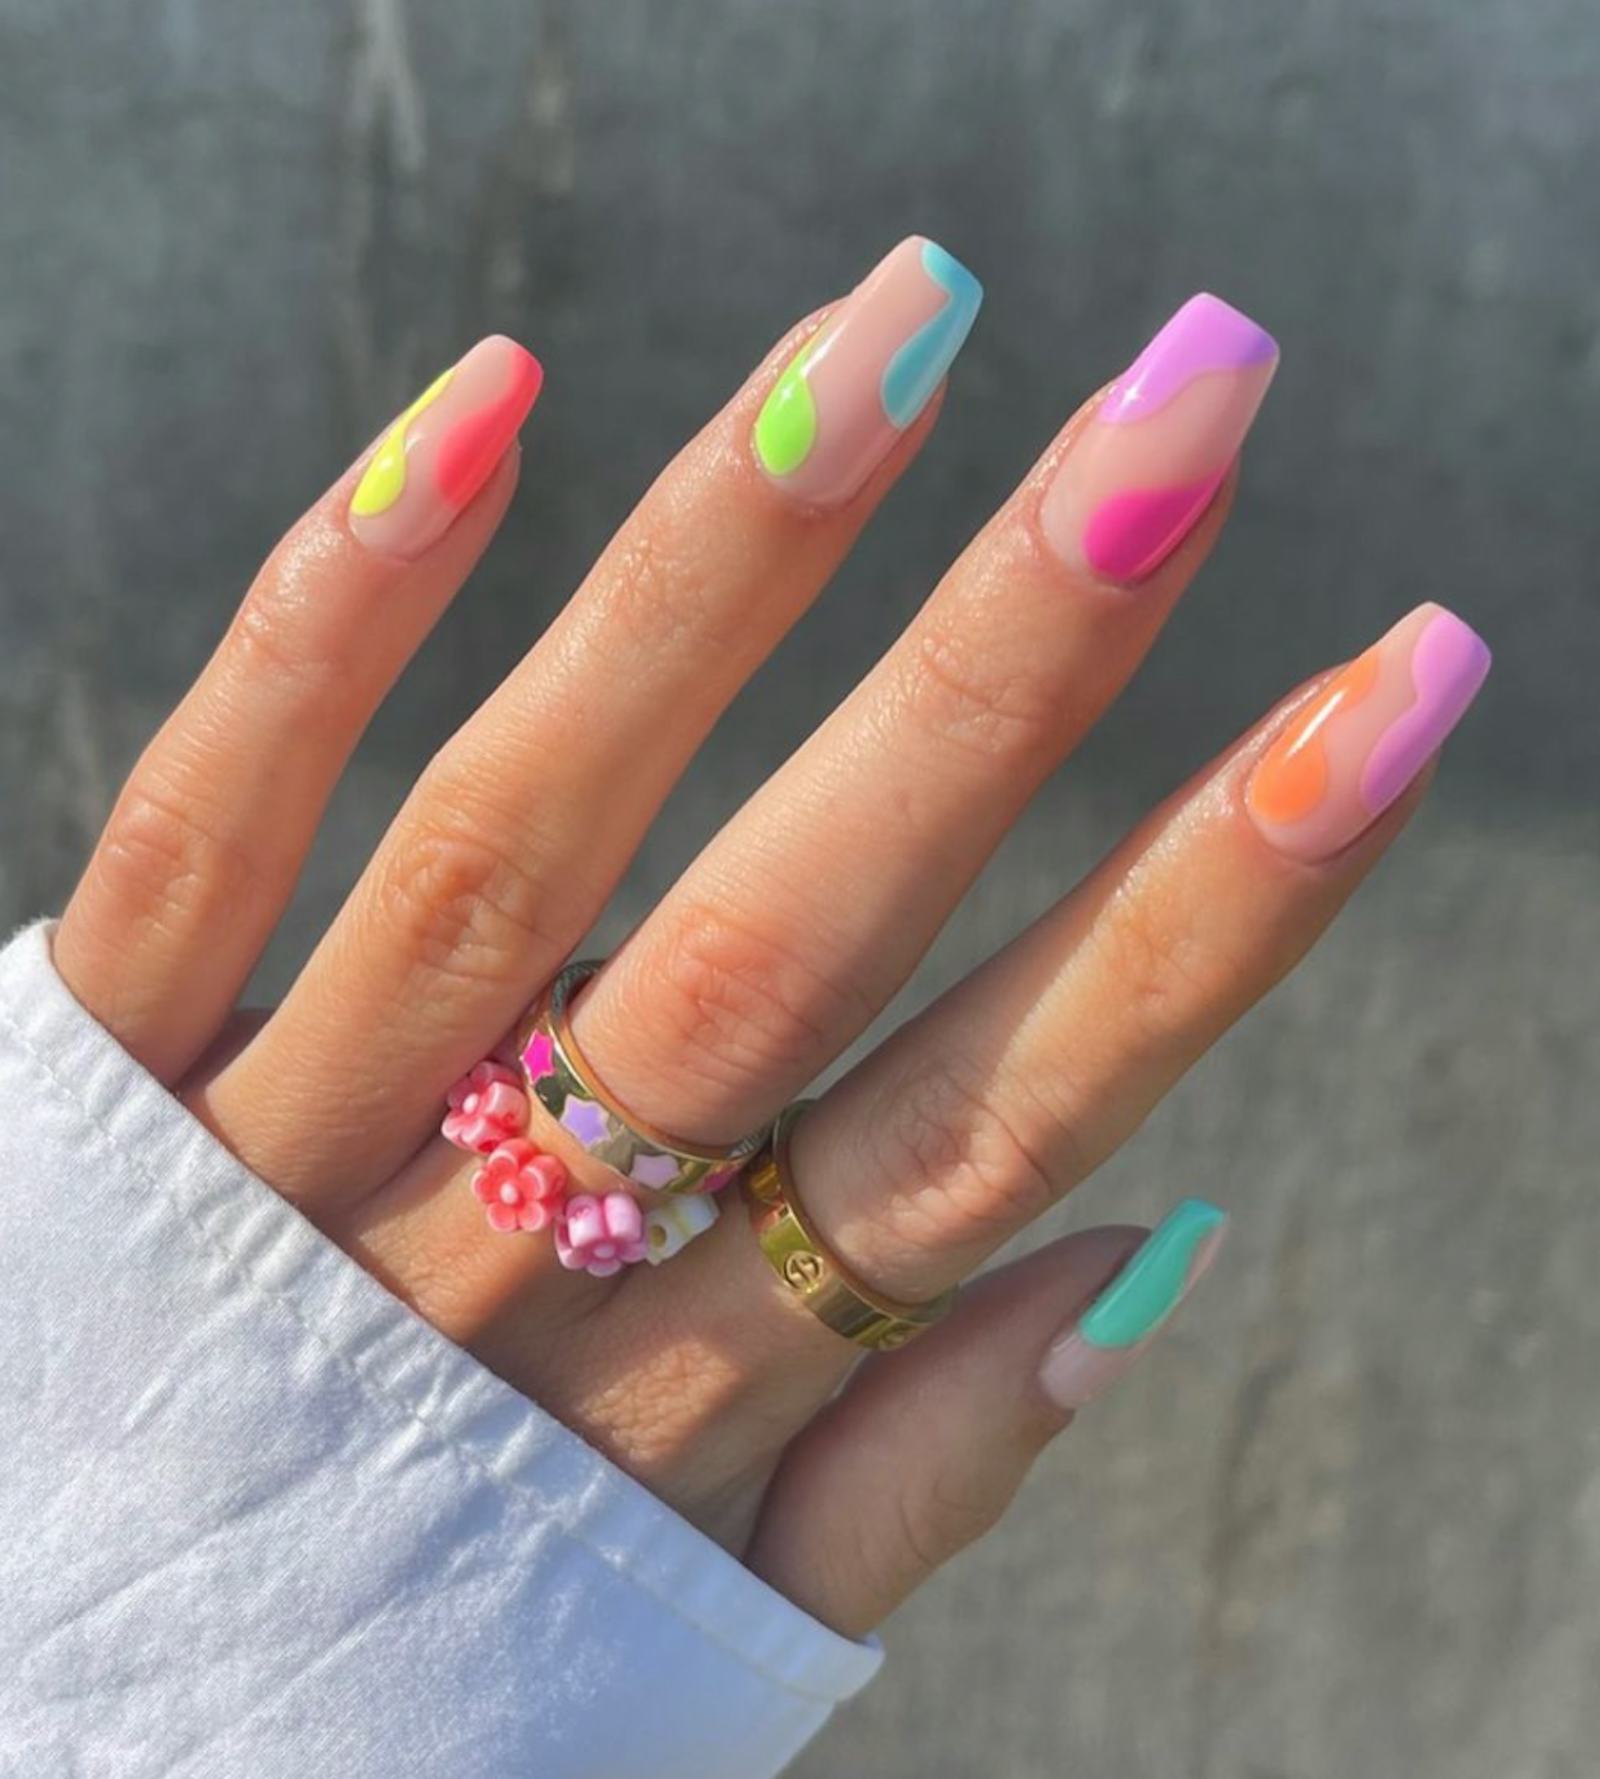 Who has the best nails on Instagram?